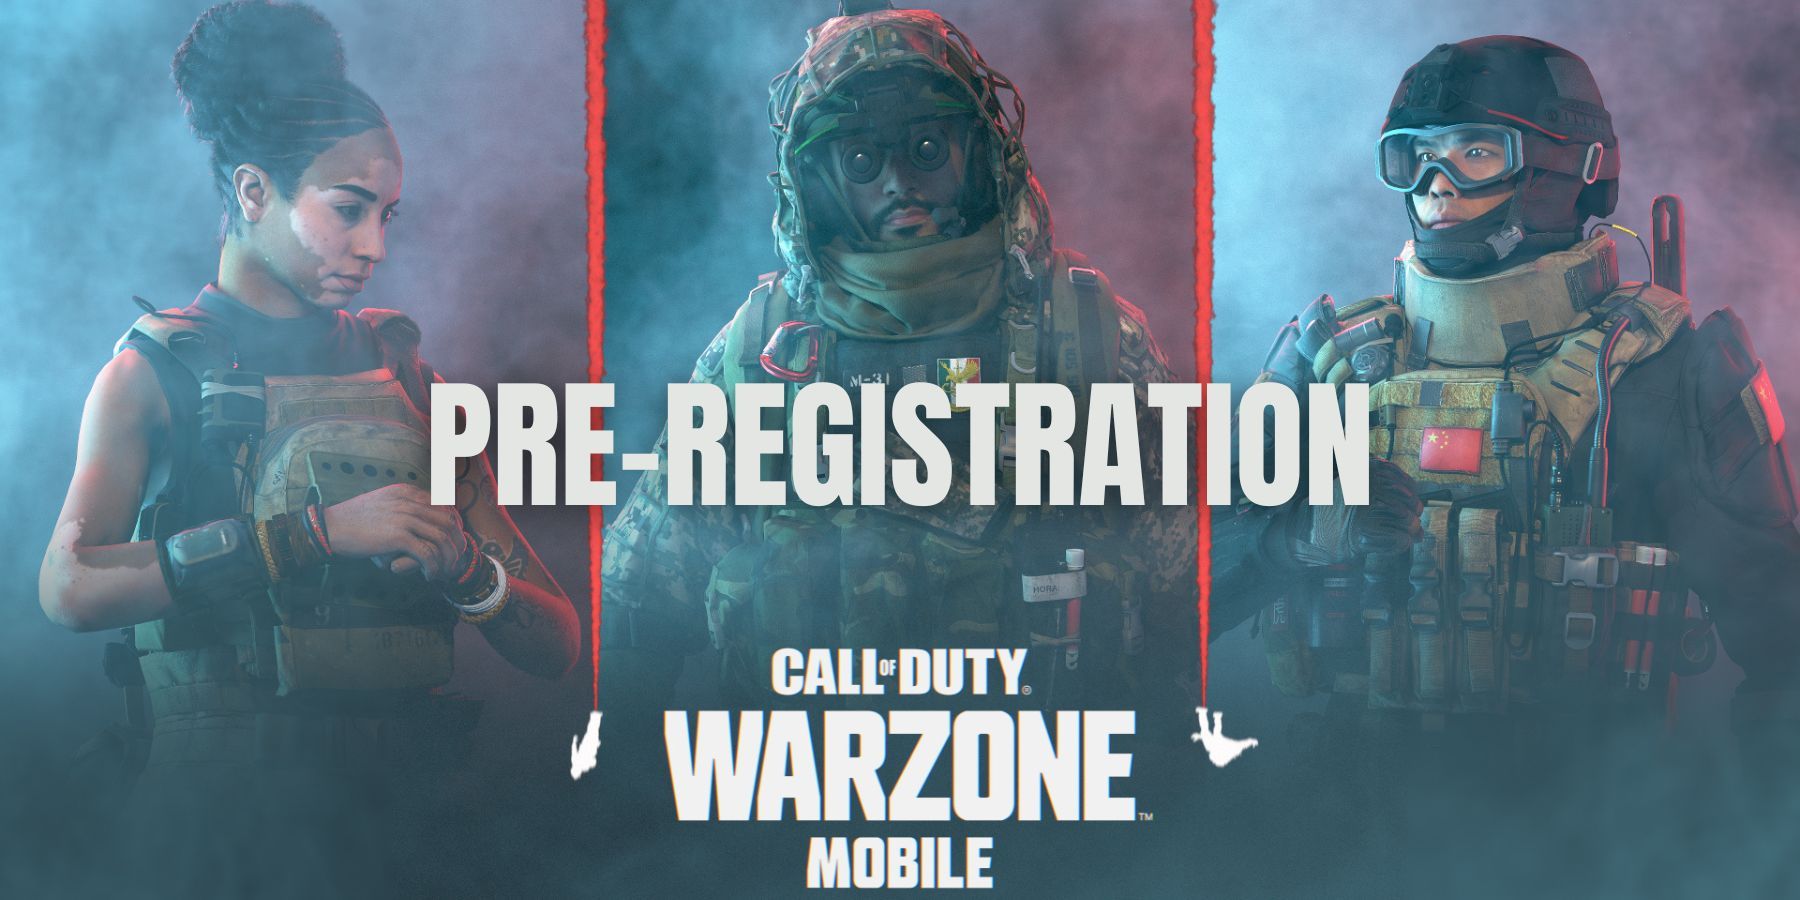 Call of Duty Warzone Mobile pre-registrations open on Android